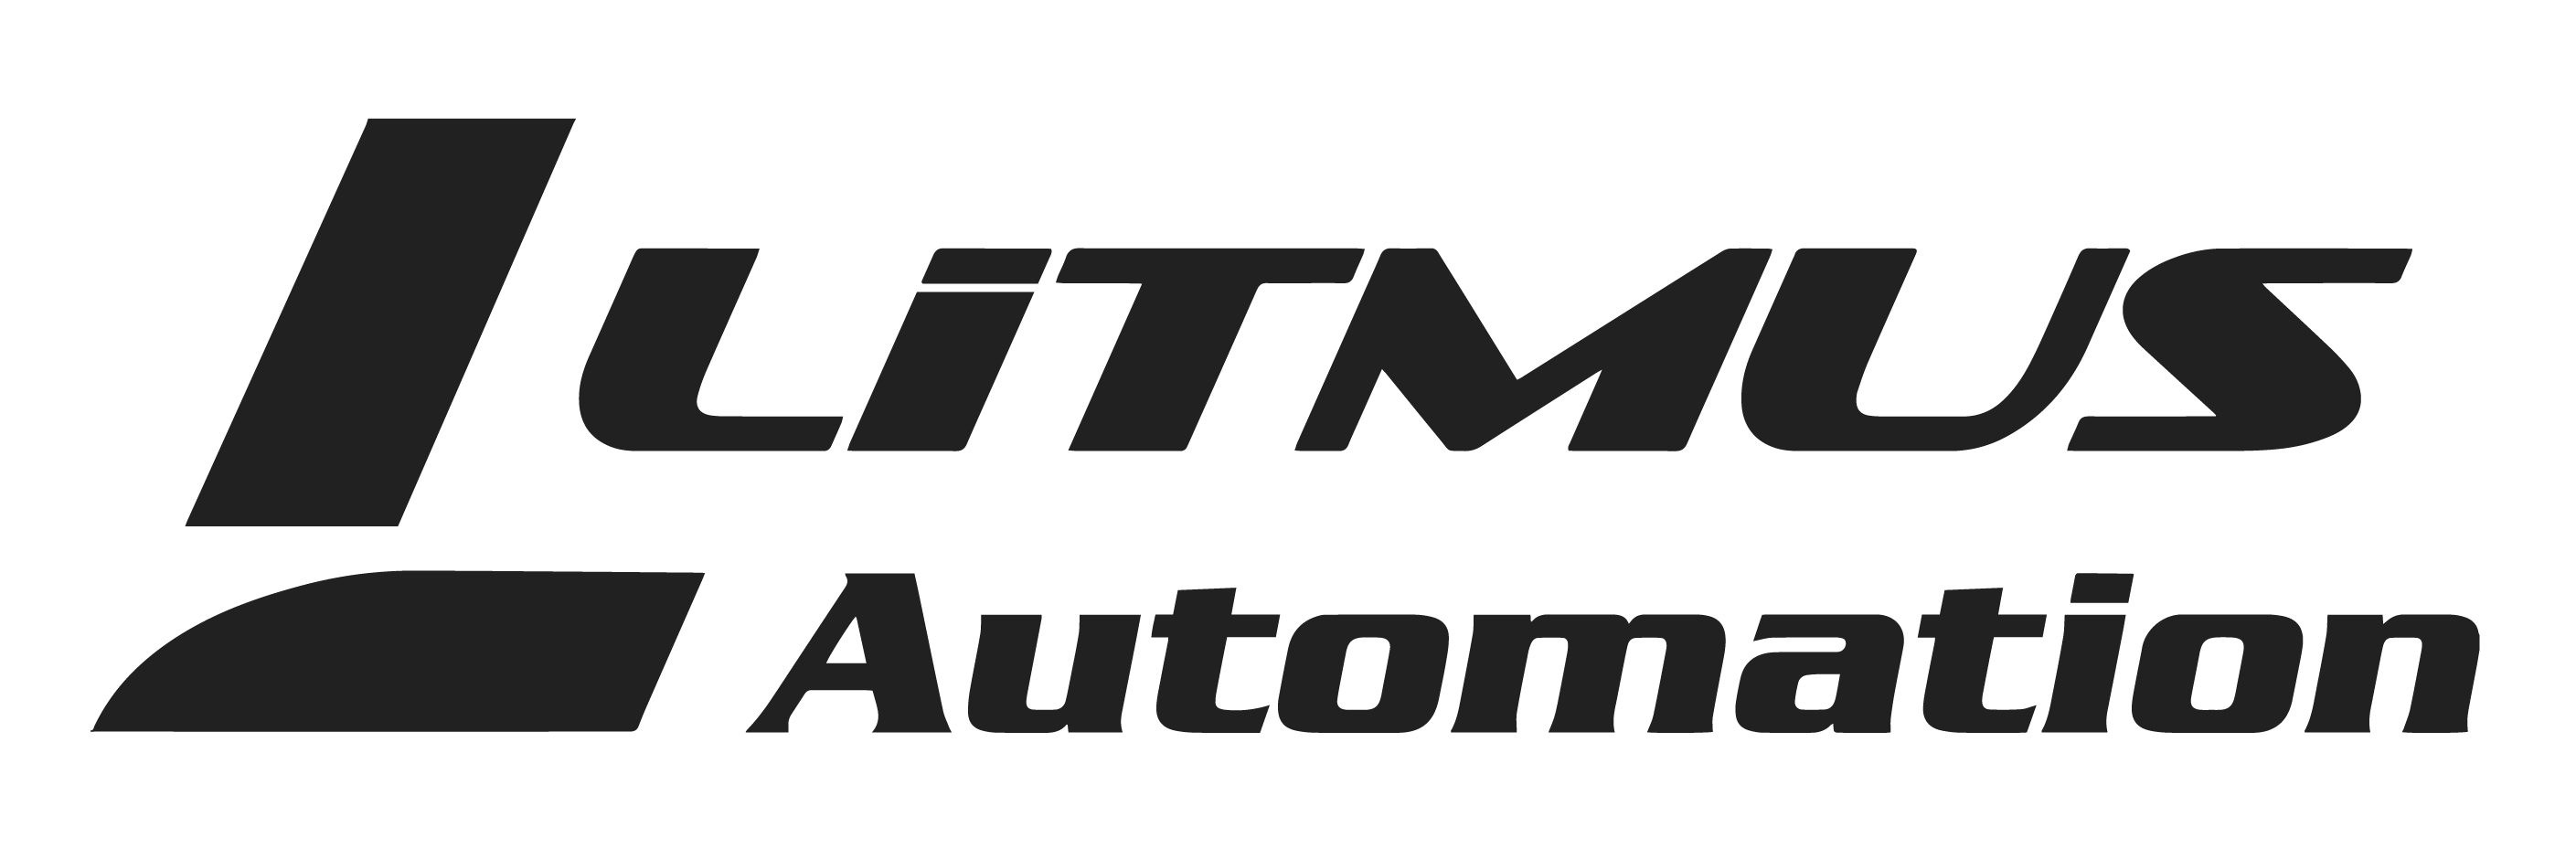 Automation Logo - Litmus Automation | Bridging The Gap For Industrial Internet of Things